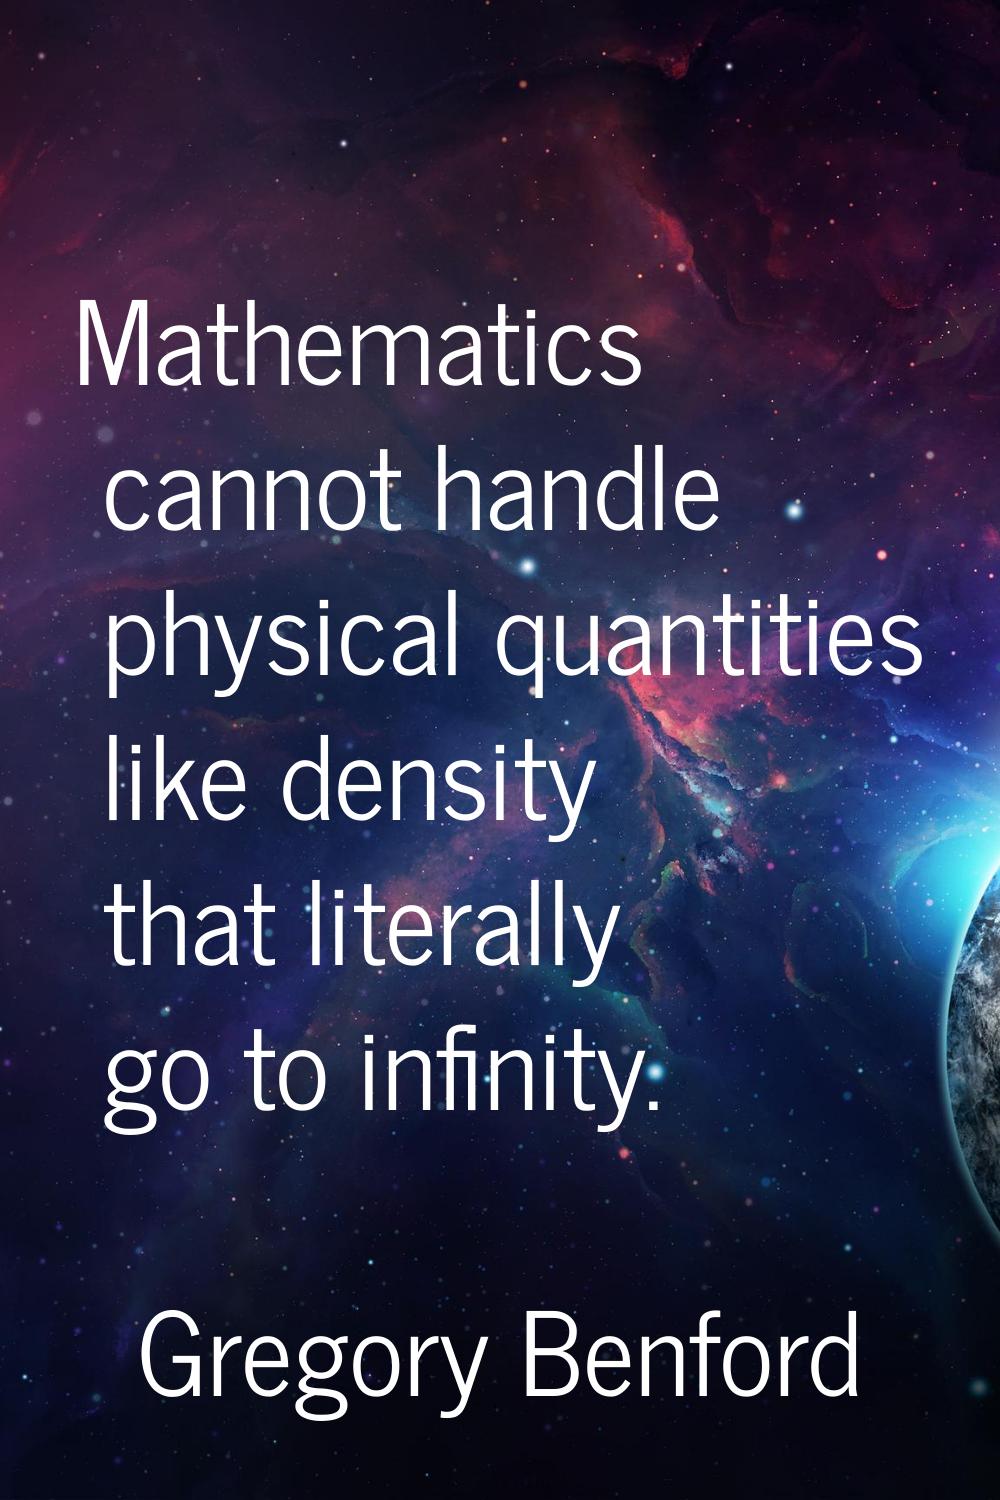 Mathematics cannot handle physical quantities like density that literally go to infinity.